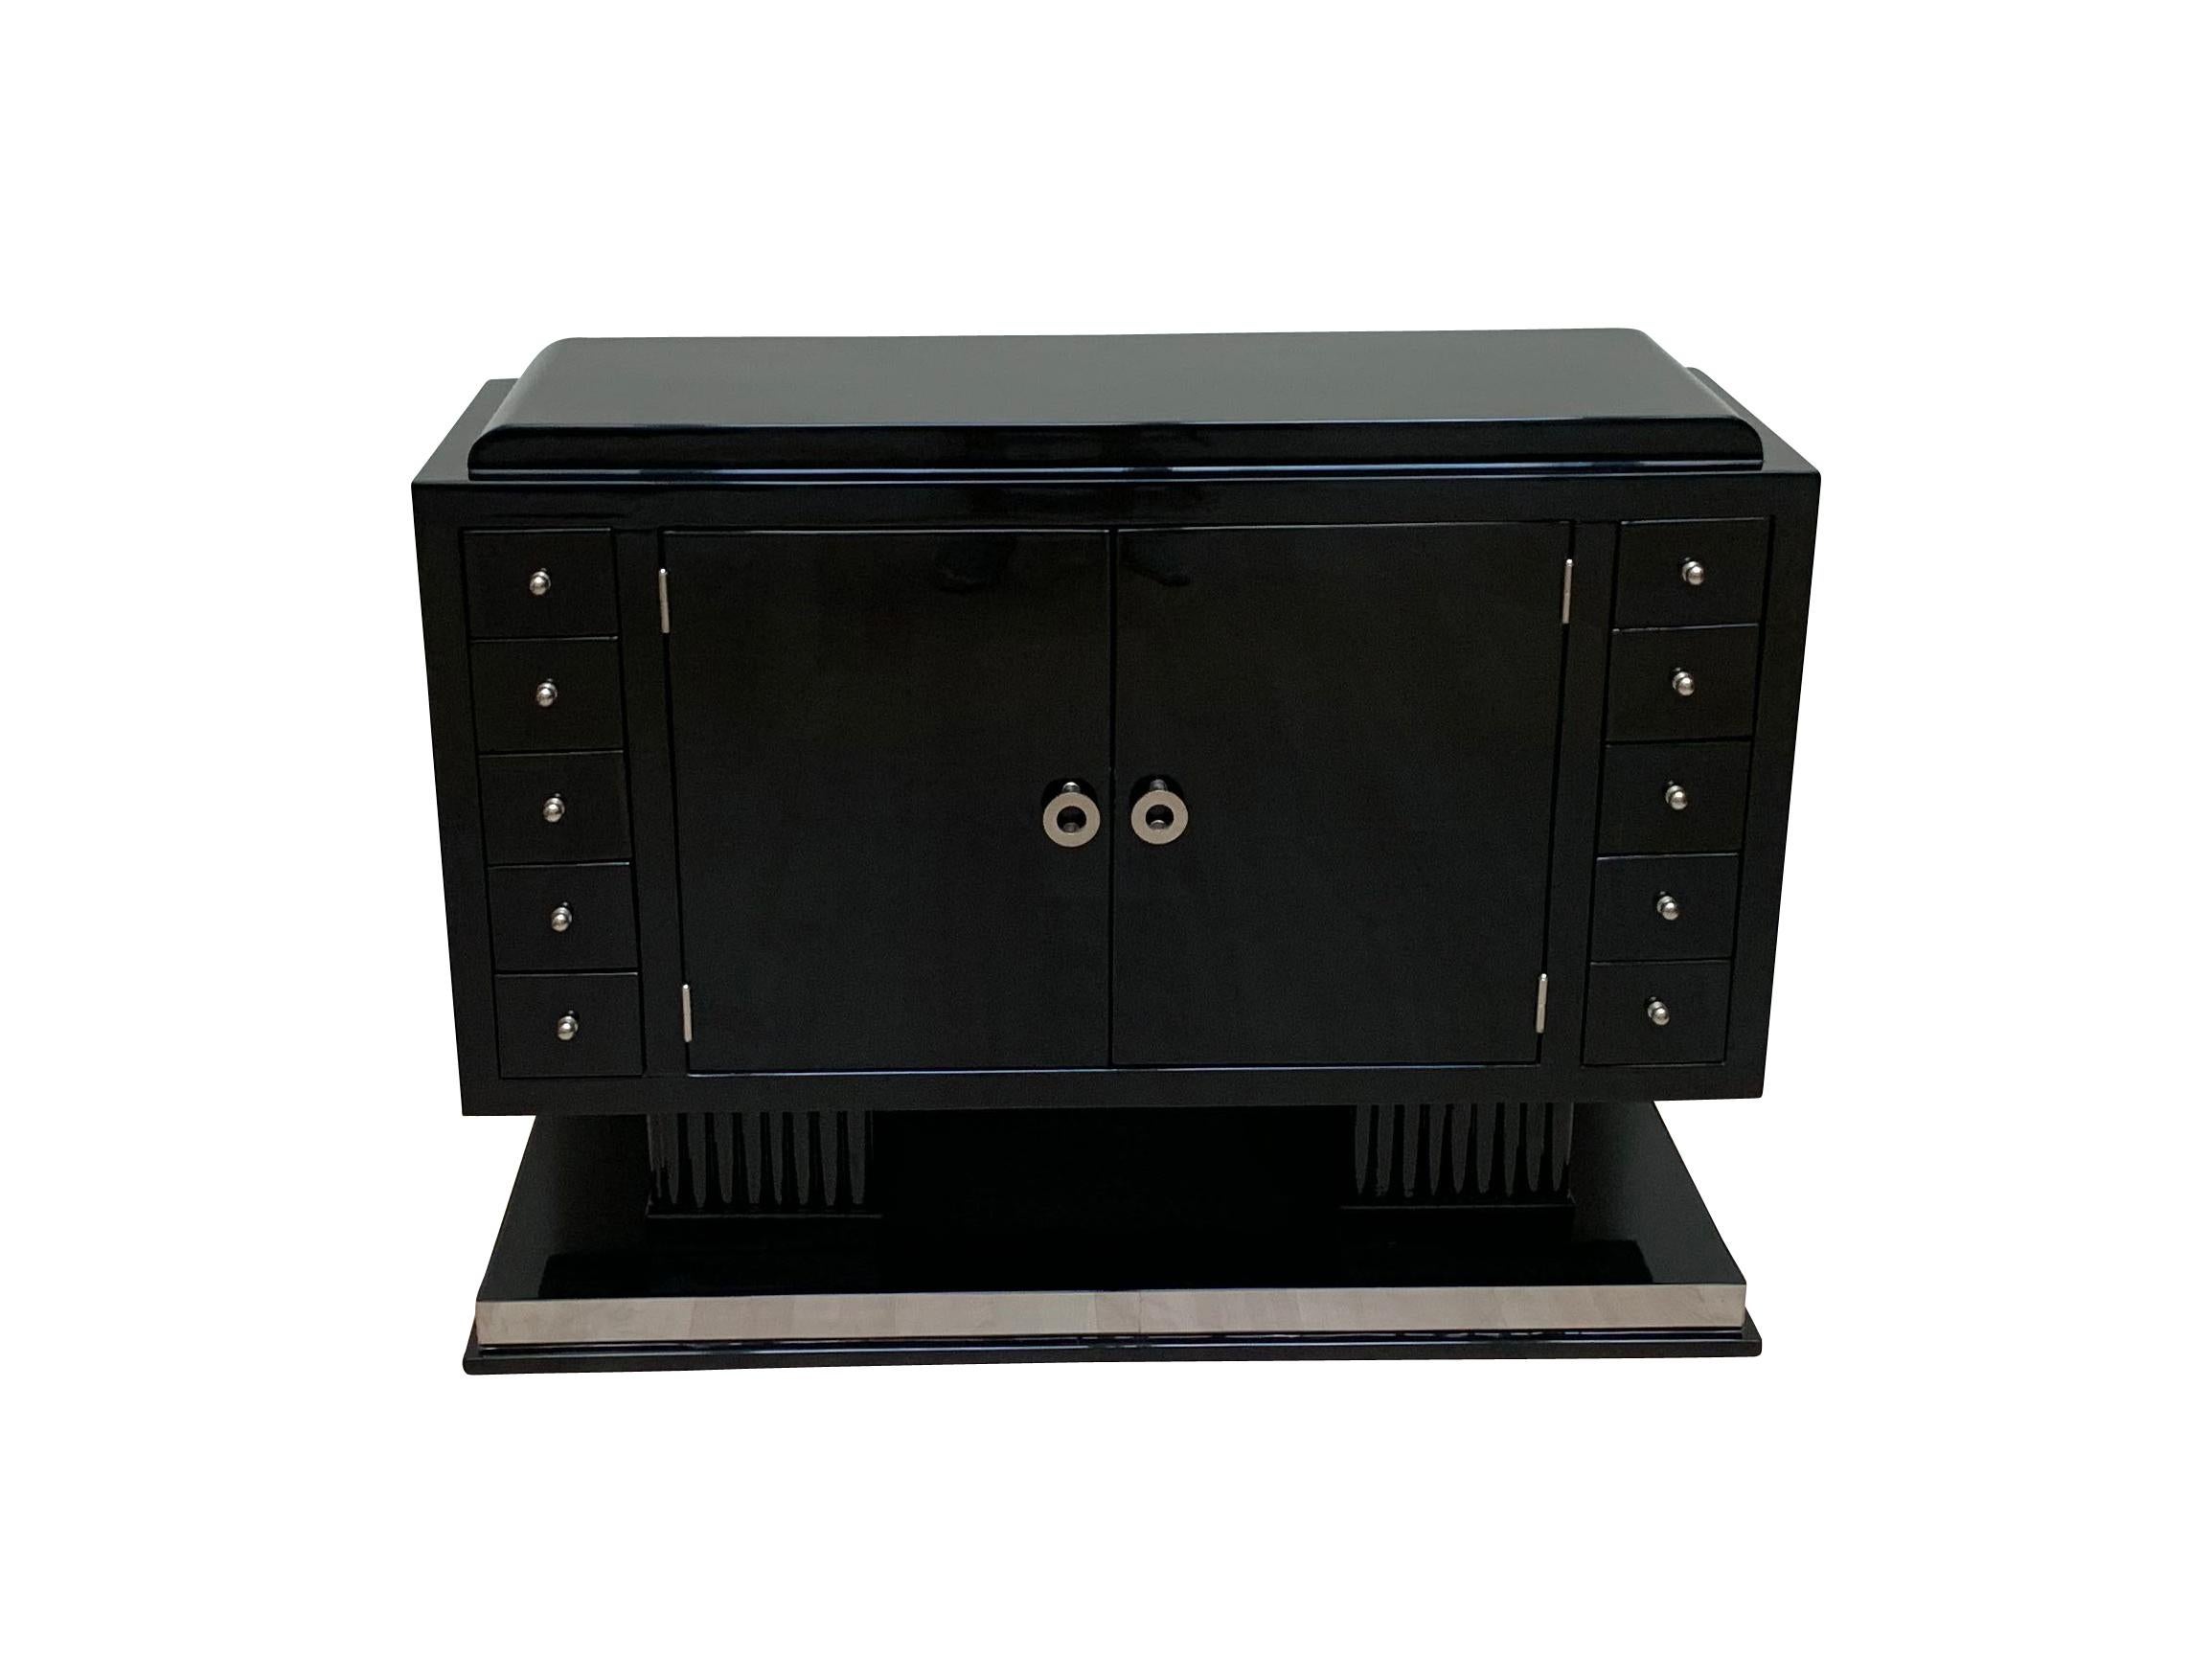 Wonderful small Art Deco sideboard from France, circa 1930.

Walnut lacquered with black piano lacquer (Polyurethane) and polished.
Very special composition with 10 little drawers and 2 doors at the front.
Two cannelures pillar legs, standing on